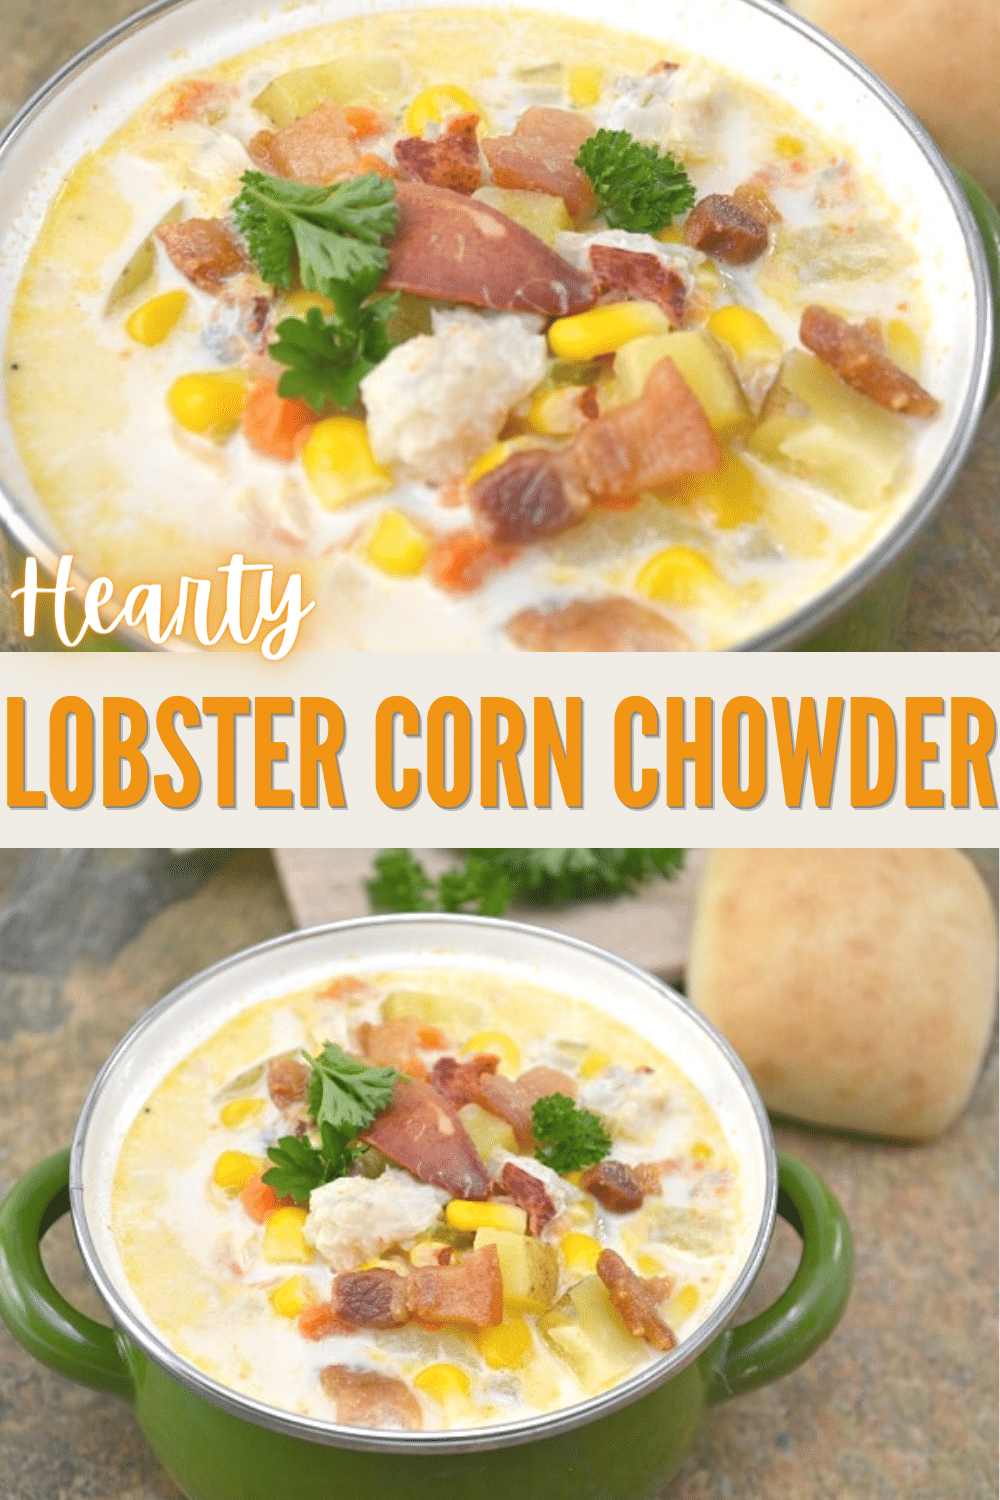 This Lobster Corn Chowder is a delicious way to warm up when it's cold outside and an affordable way to enjoy the subtle but decadent flavor of lobster. #souprecipes #lobster #chowder via @wondermomwannab